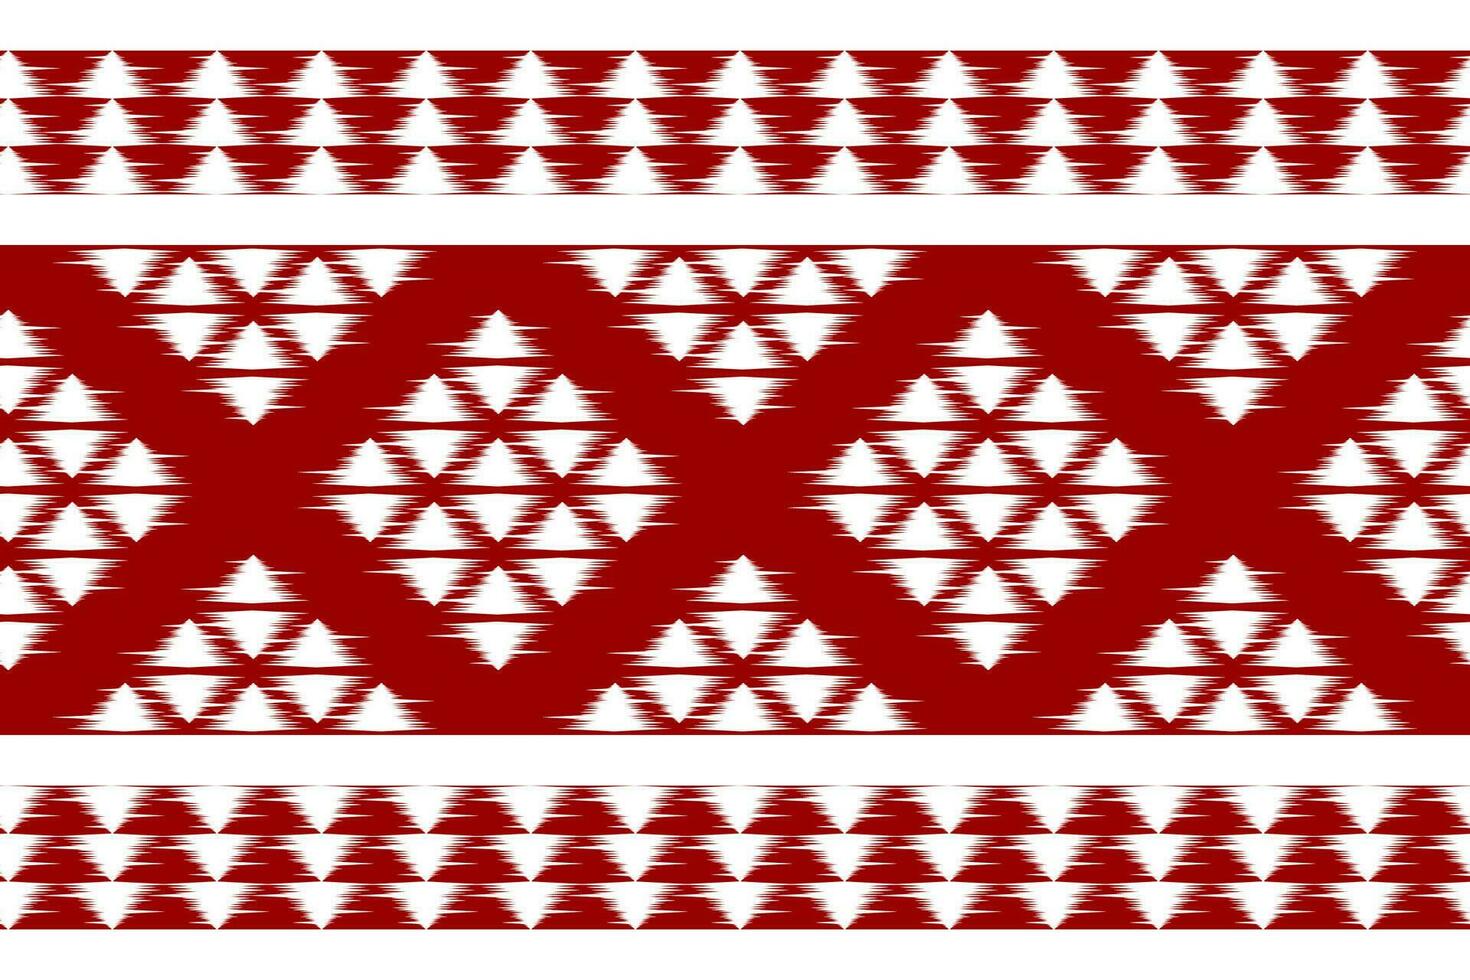 Carpet ikat red pattern art. Geometric ethnic ikat seamless pattern in tribal. American and Mexican style. vector